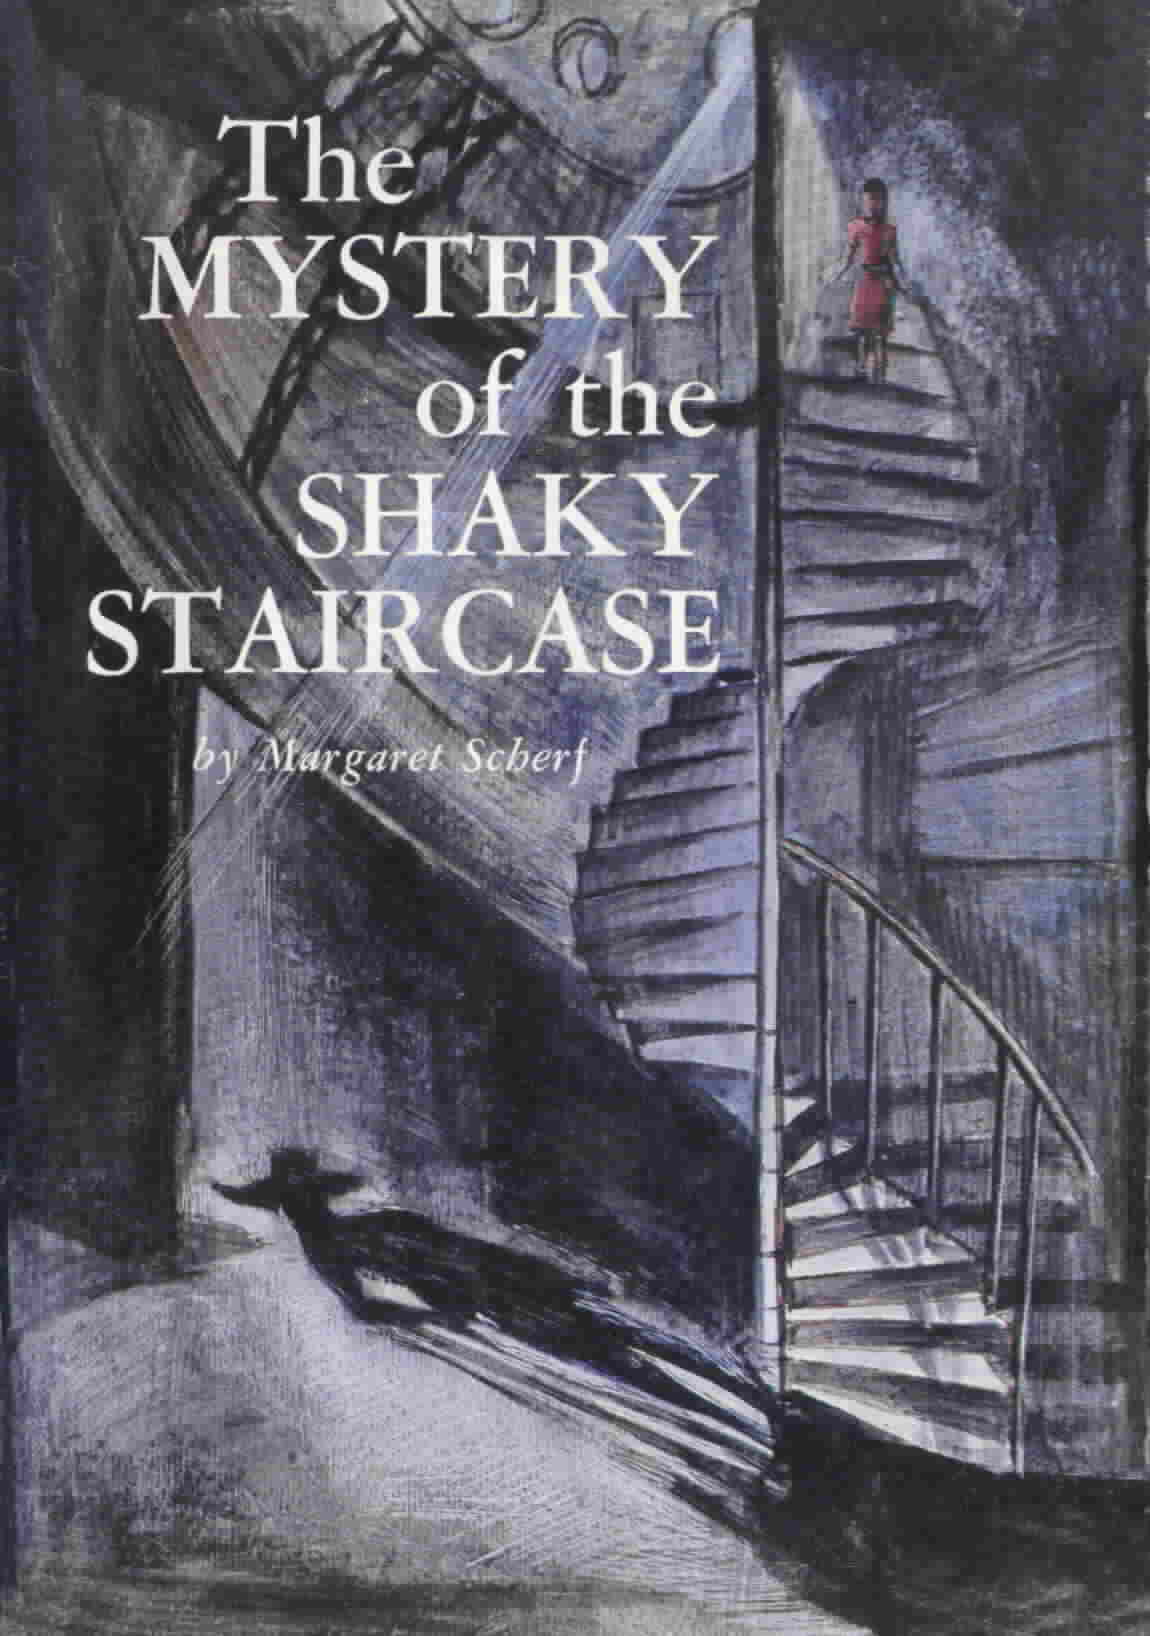 The Mystery of the Shaky Staircase